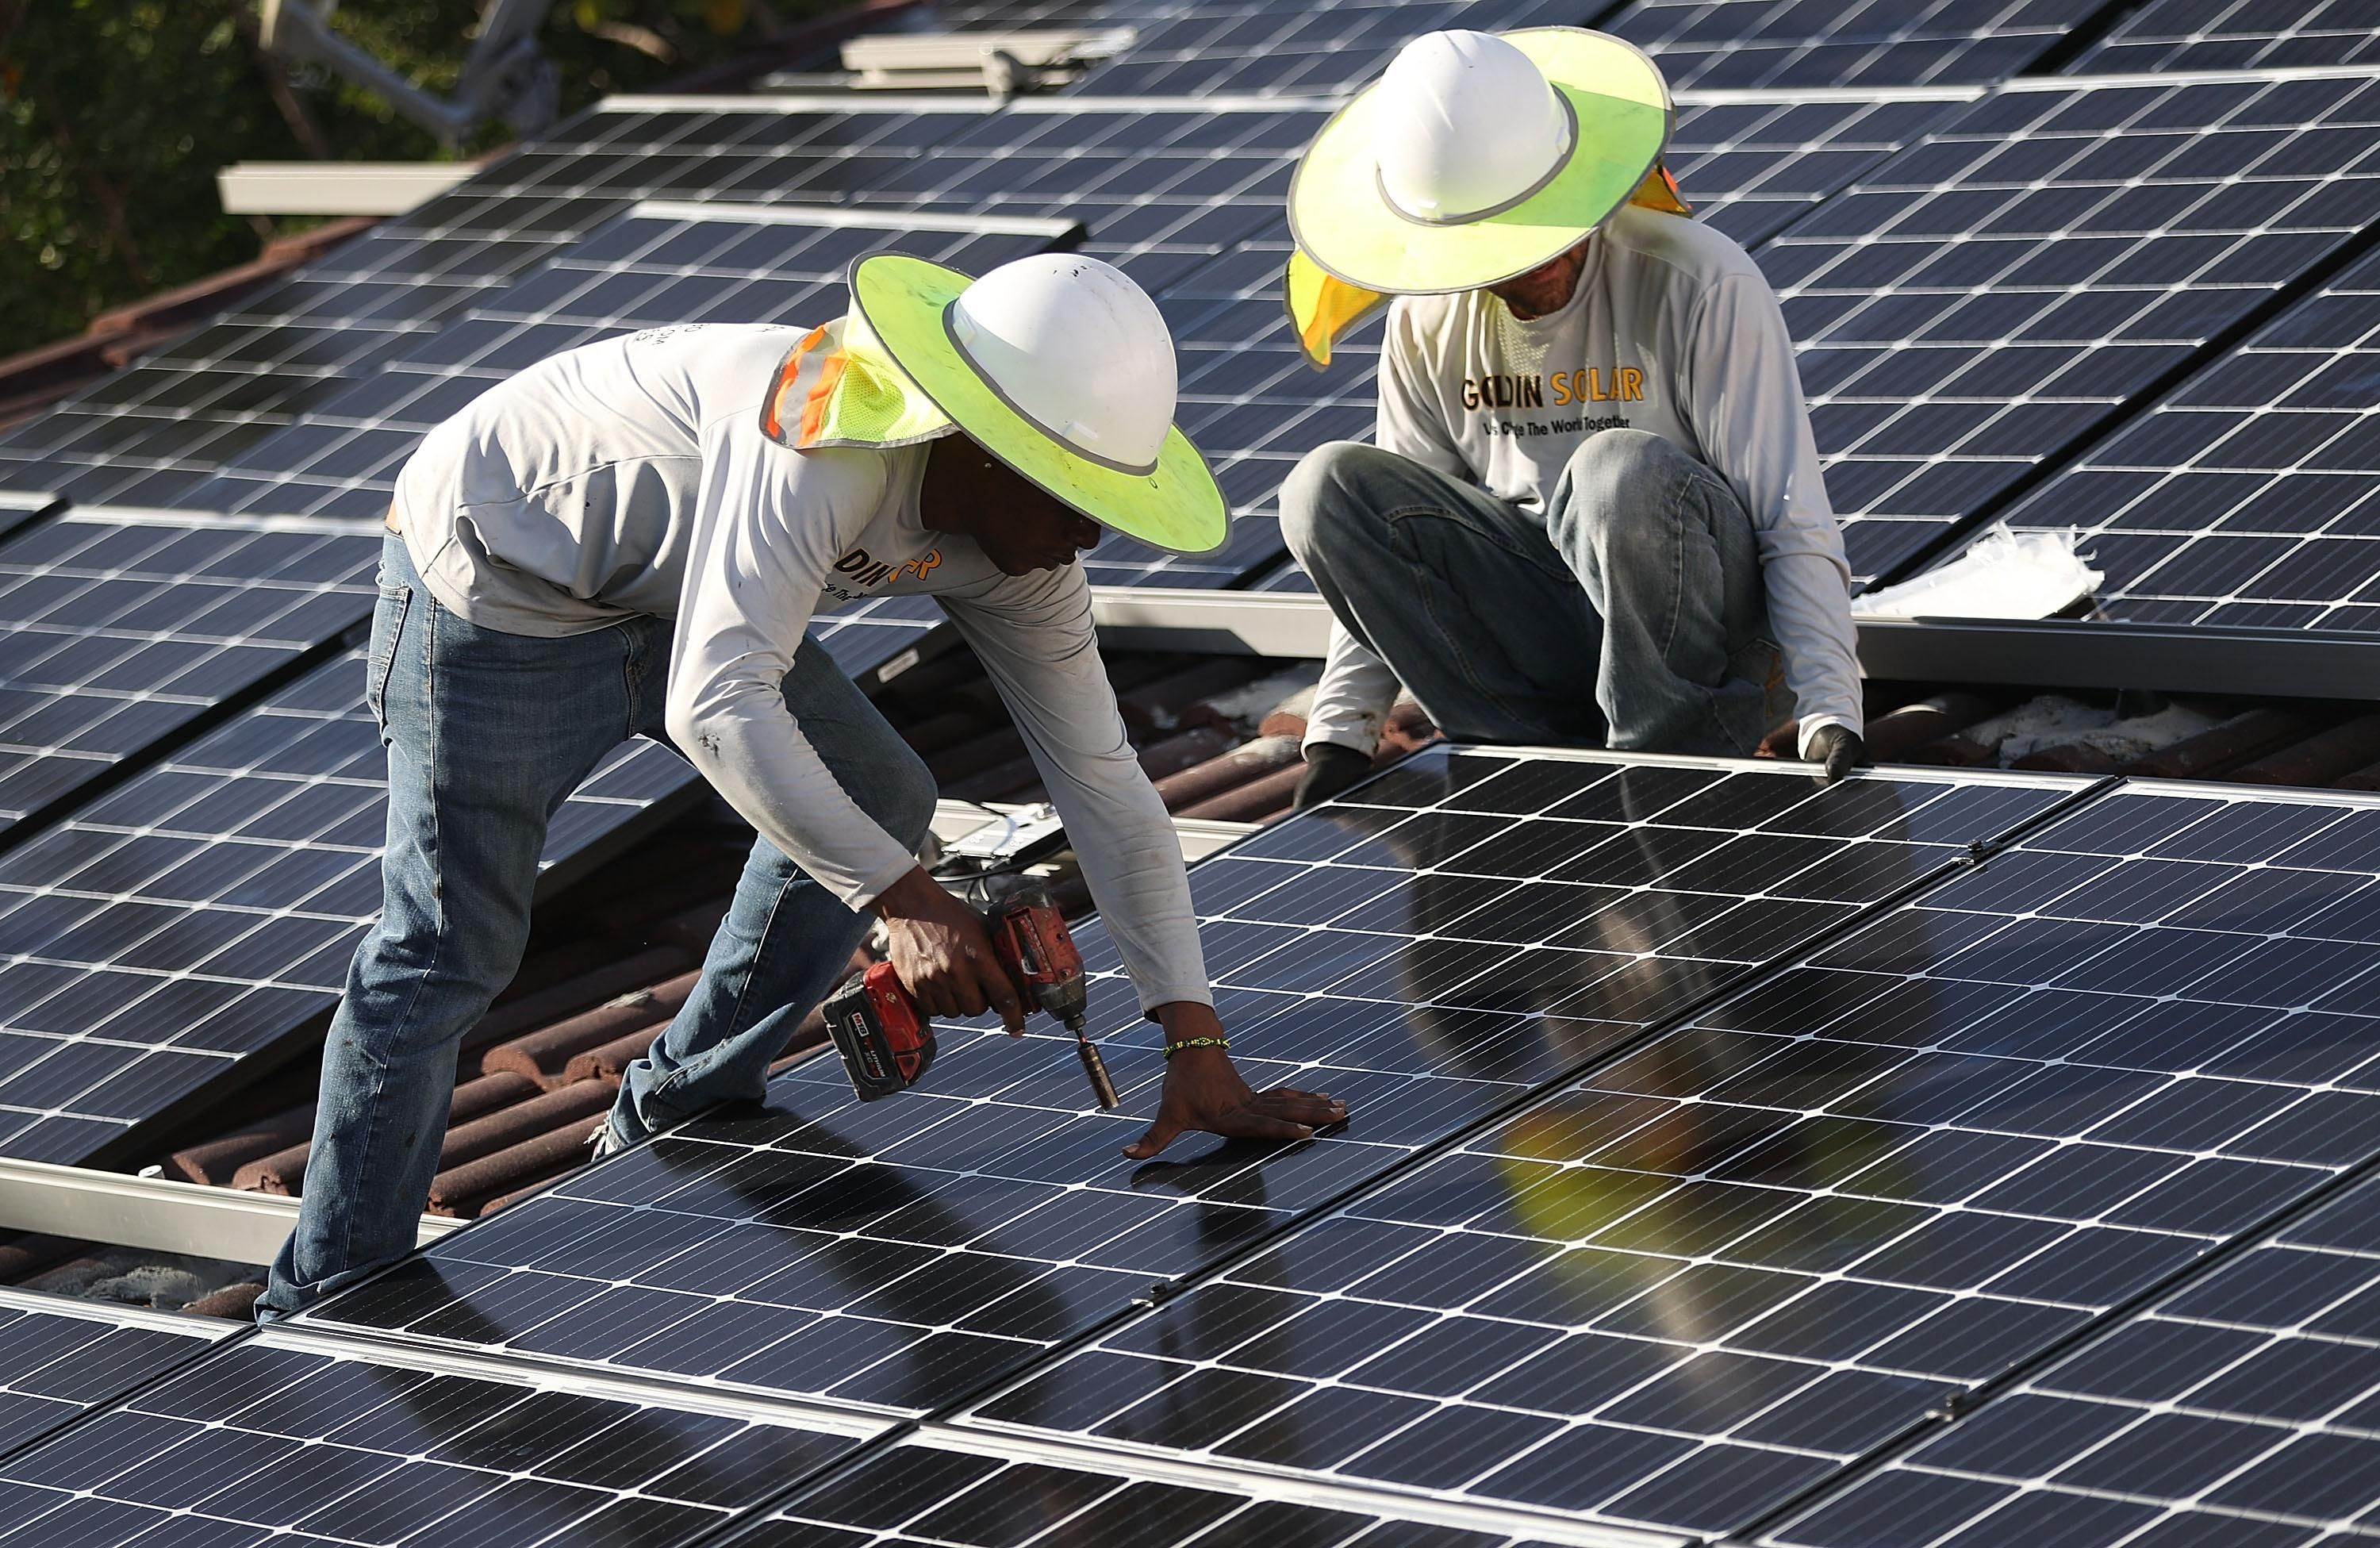 Roger Garbey and Andres Hernandez, from the Goldin Solar company, install a solar panel system on the roof of a home on January 23, 2018 in Palmetto Bay, Florida. (Photo: Joe Raedle via Getty Images)